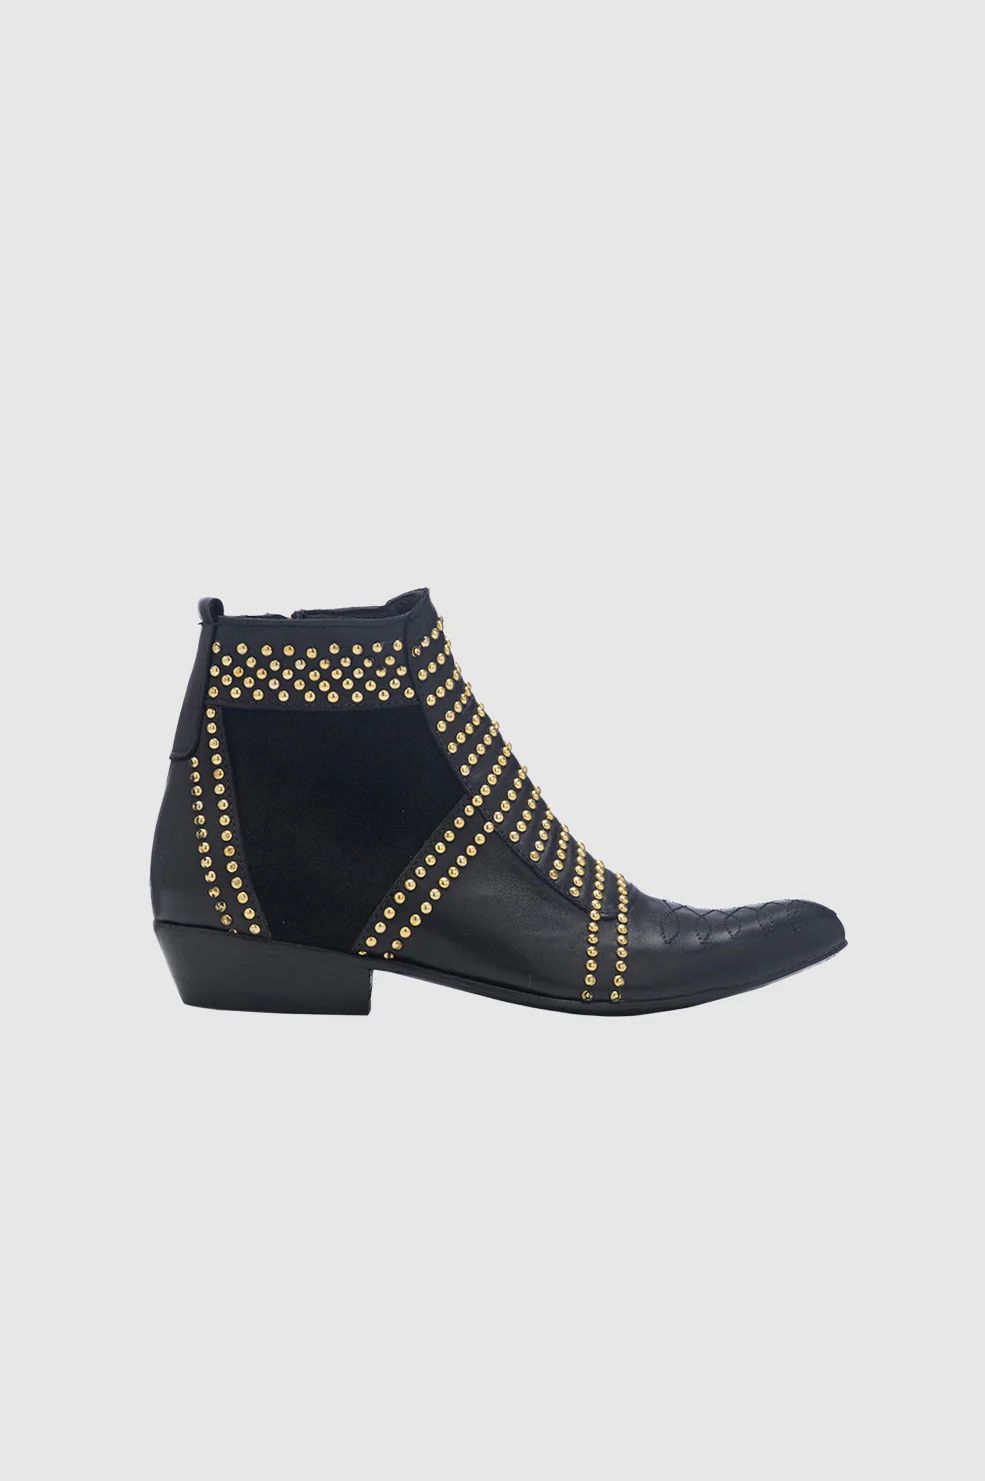 Charlie Boots - Gold Studs | Anine Bing